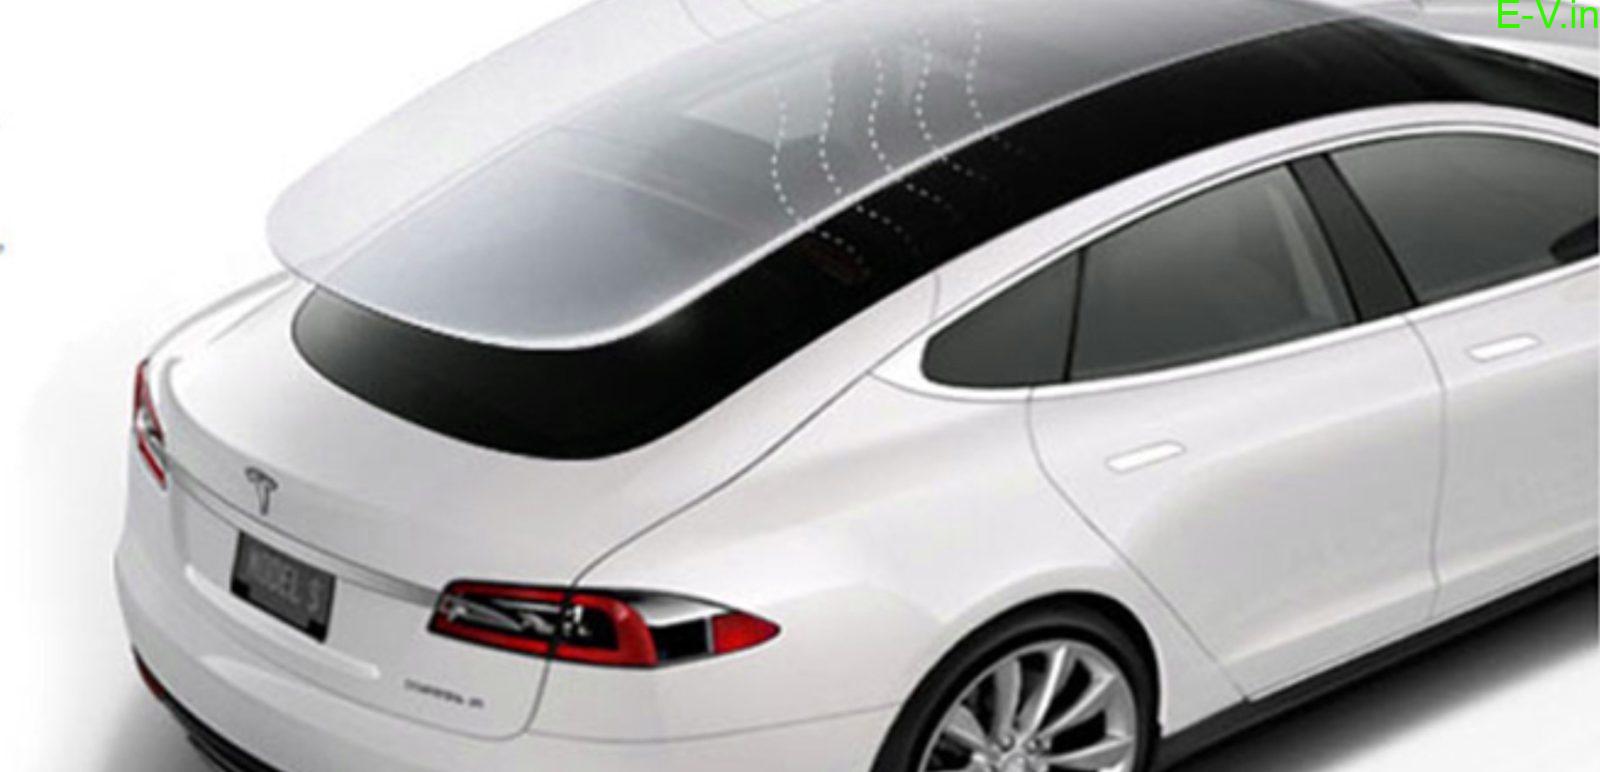 Tesla's New Glass Technology Reduces Noise